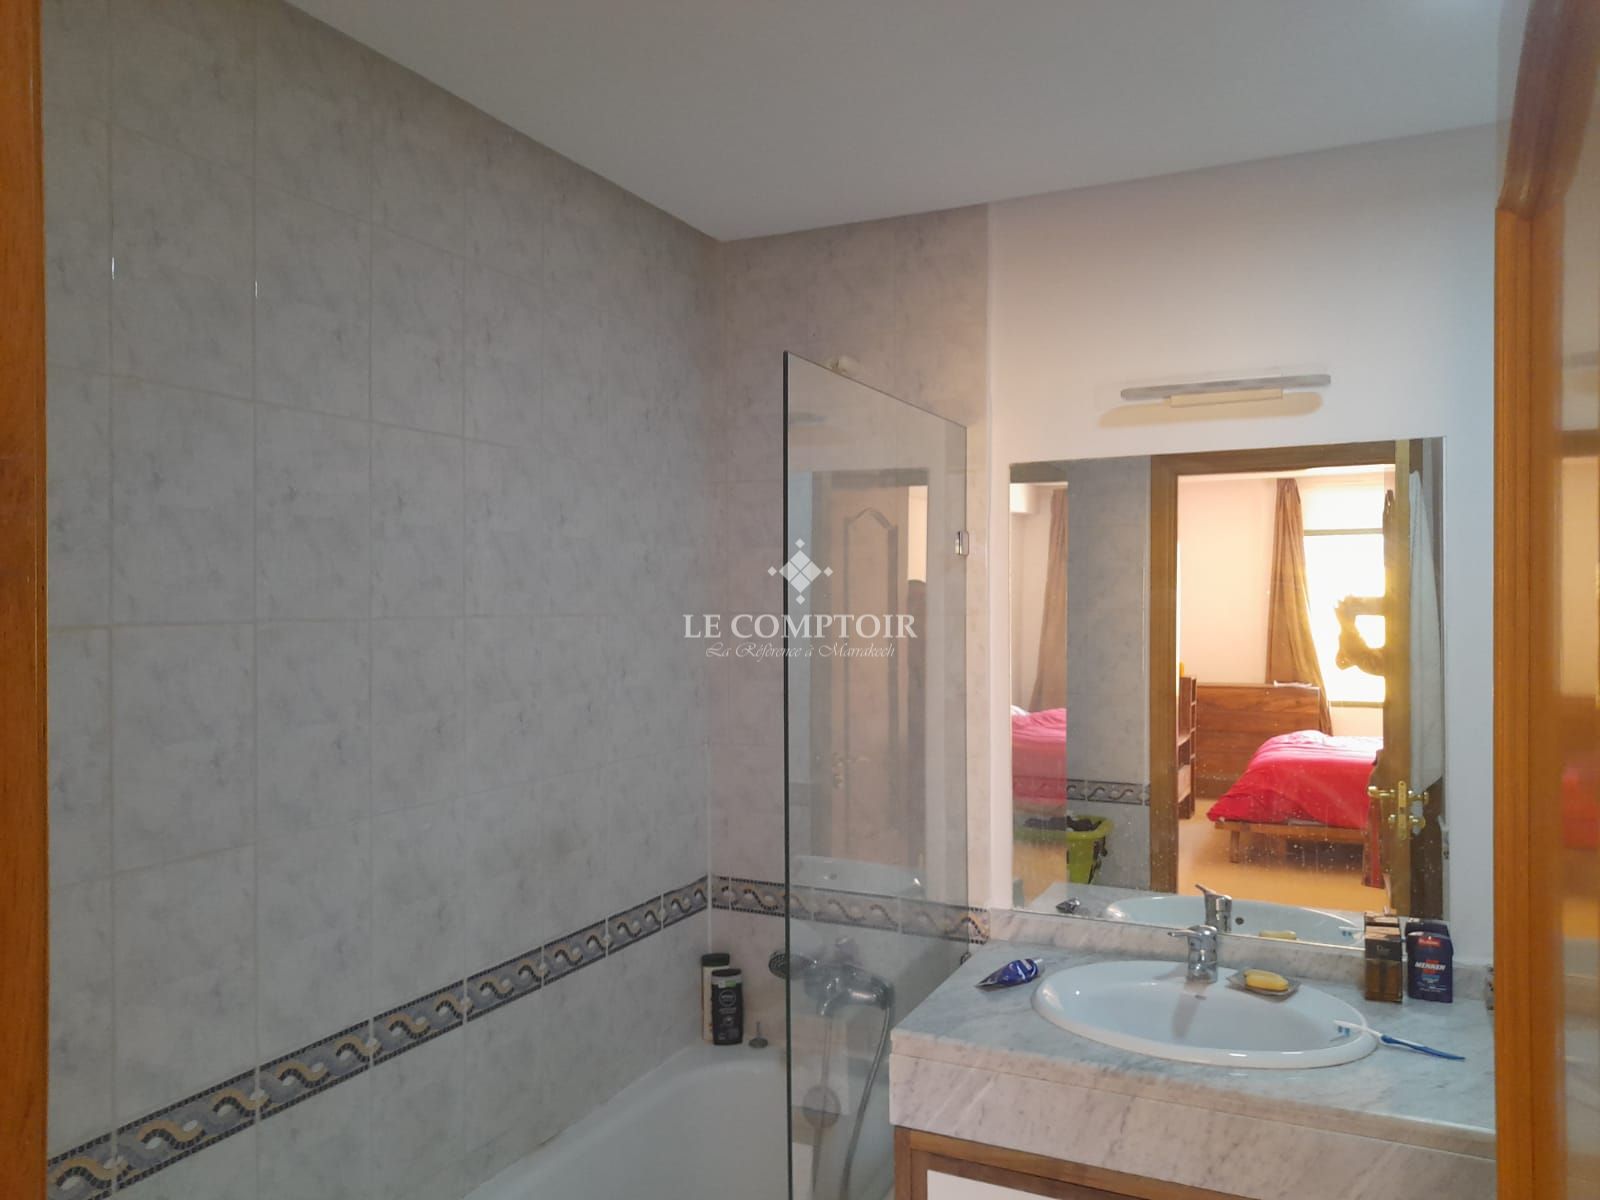 Le Comptoir Immobilier Agence Immobiliere Marrakech Location Appartement Gueliz Residence 1